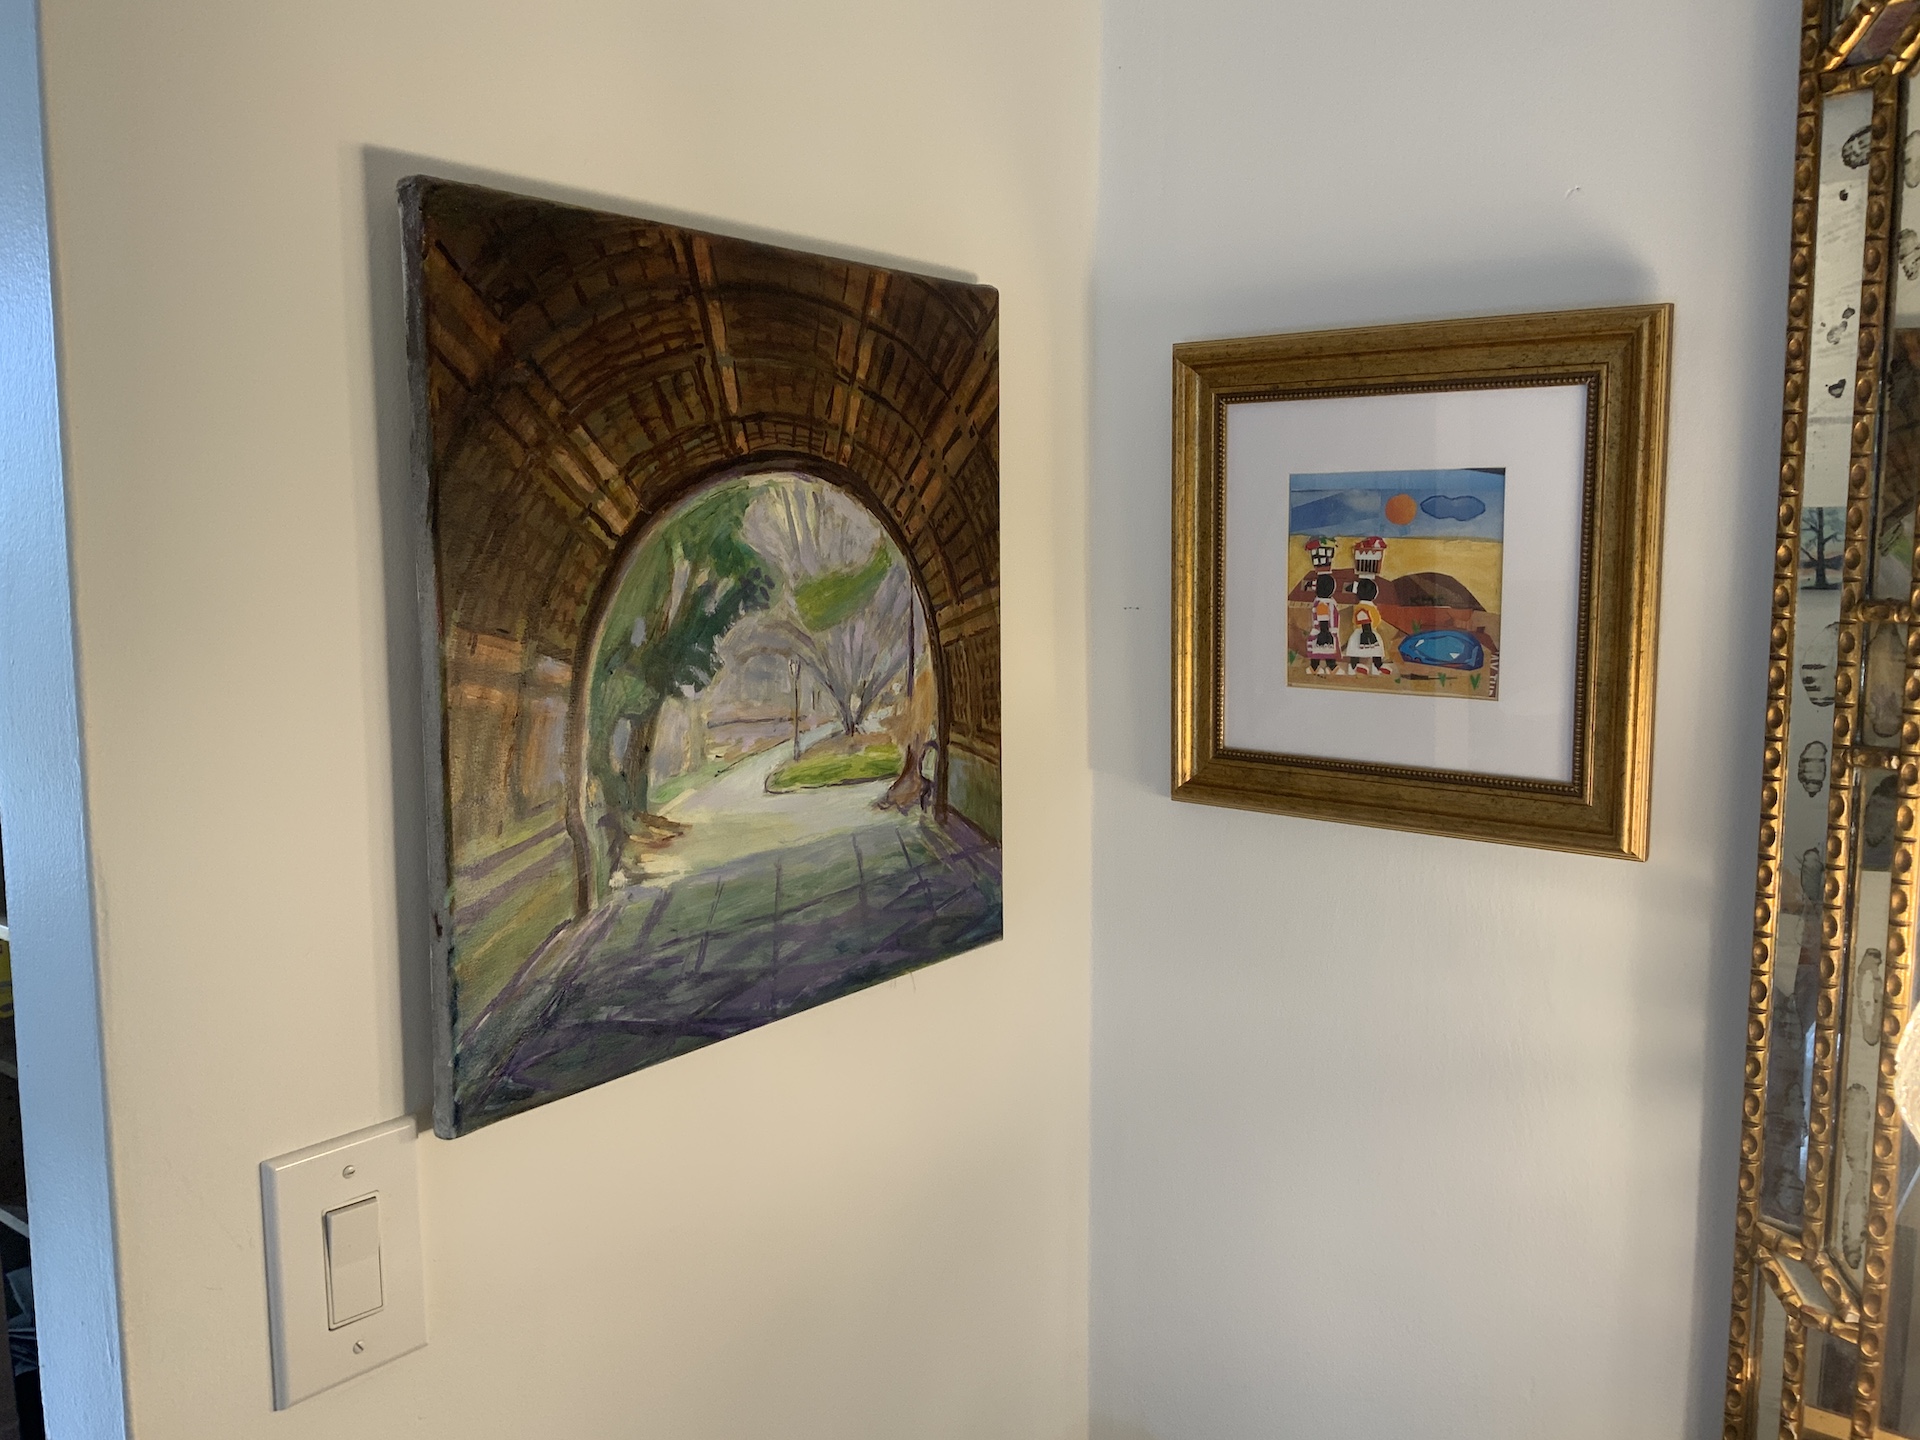 Cleft ridge arch painting by Noel Hefele in context